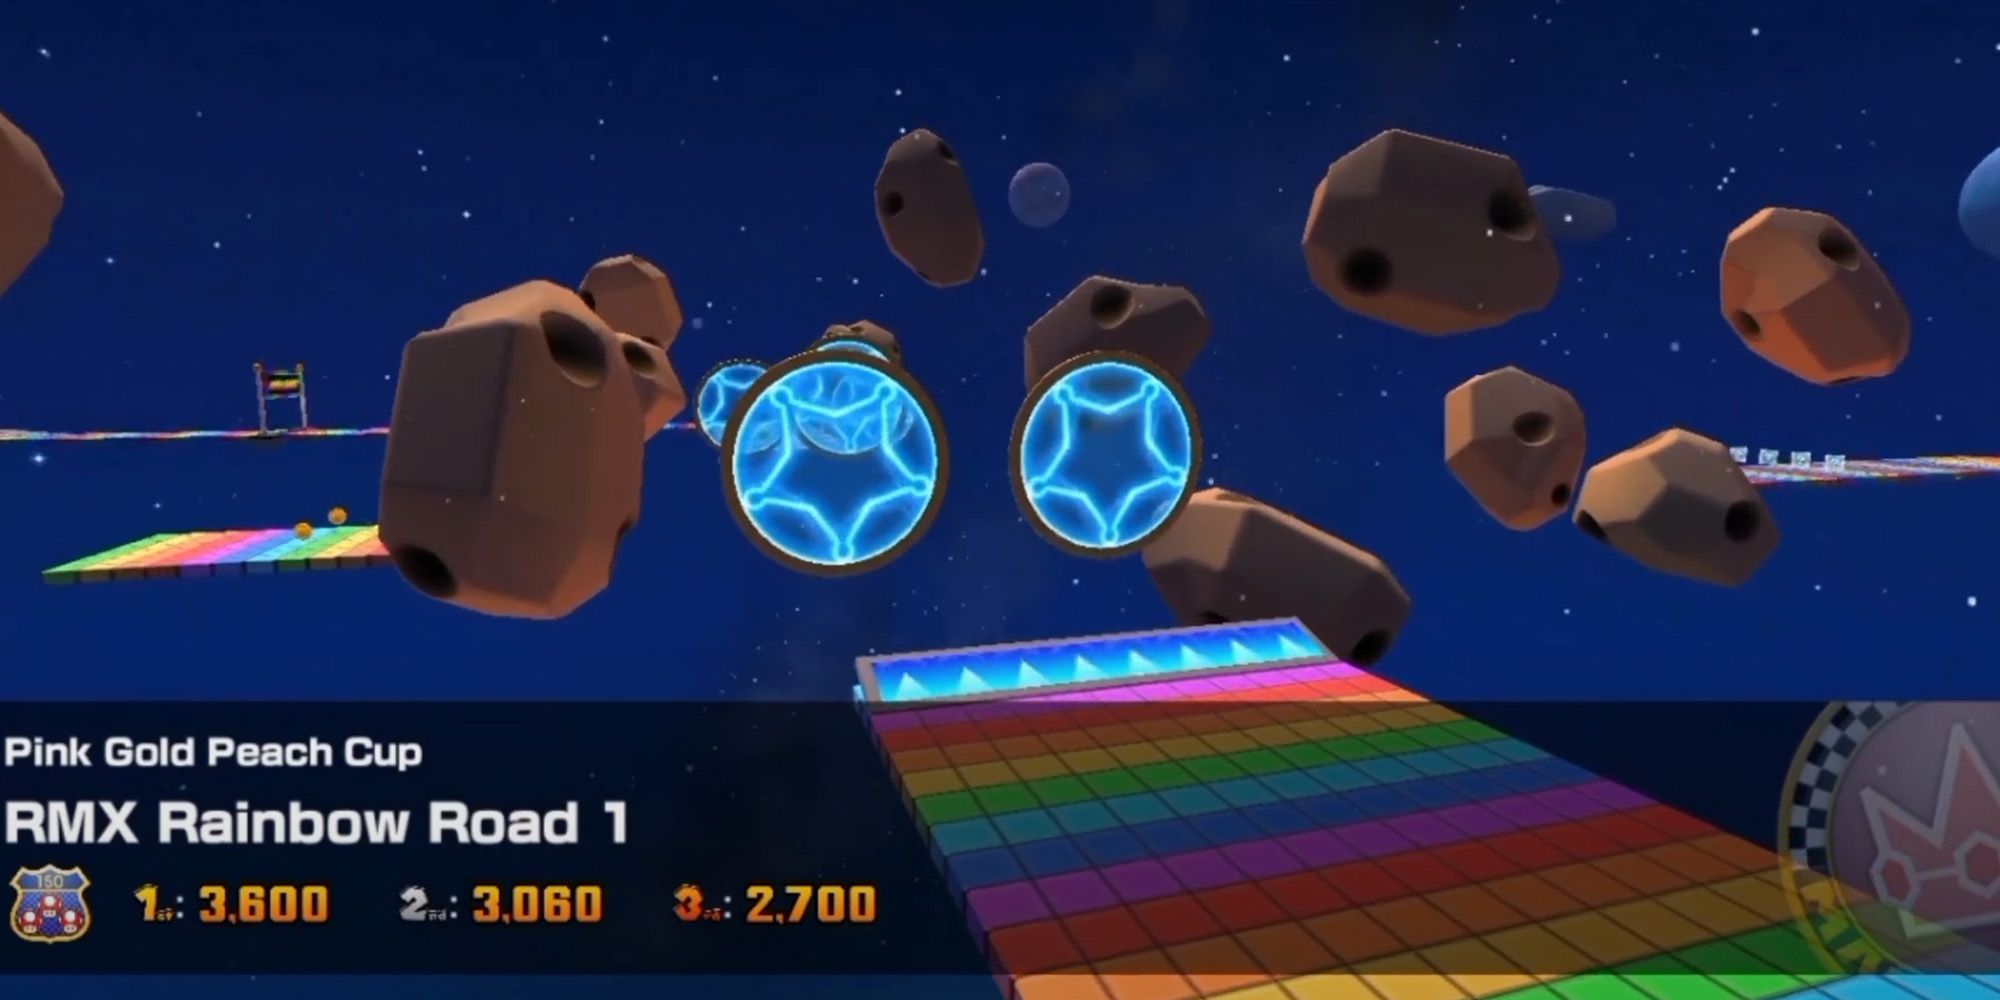 Mario Kart Tour - Asteroids and stars float about RMX Rainbow Road 1